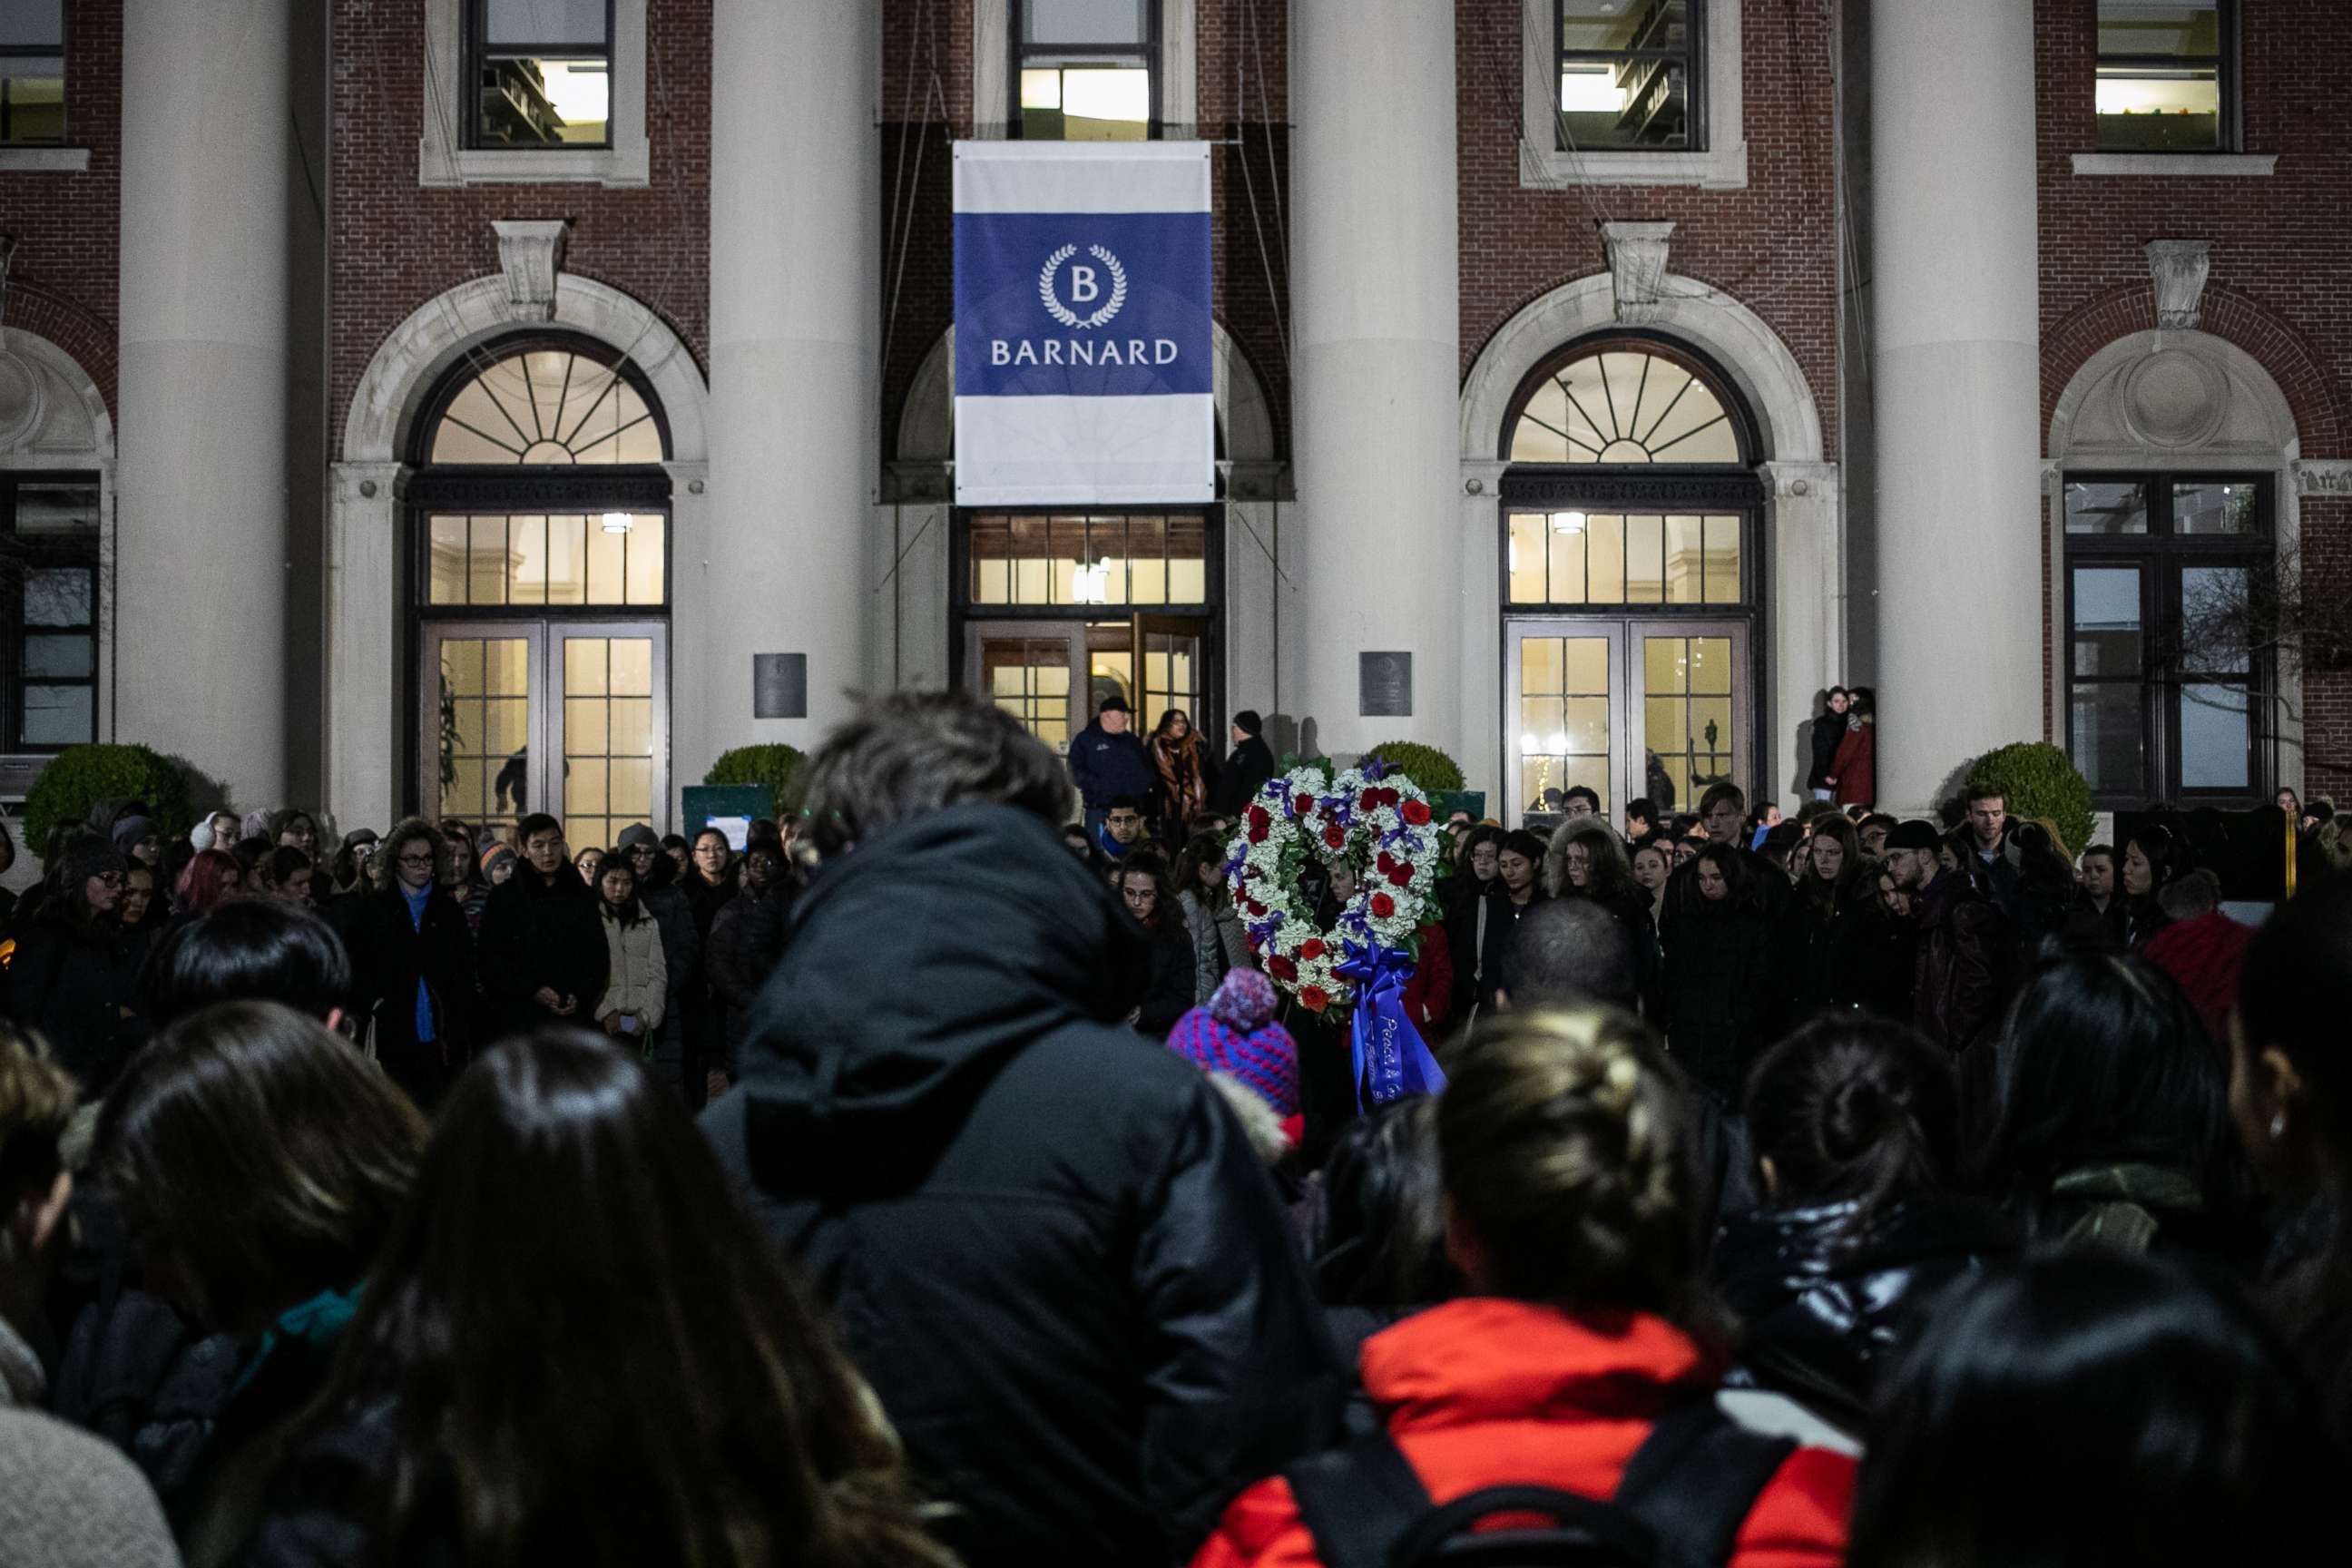 PHOTO: Students gather at the entrance of Barnard College in New York City during a vigil held for slain 18-year-old Tessa Majors on Dec. 12, 2019,